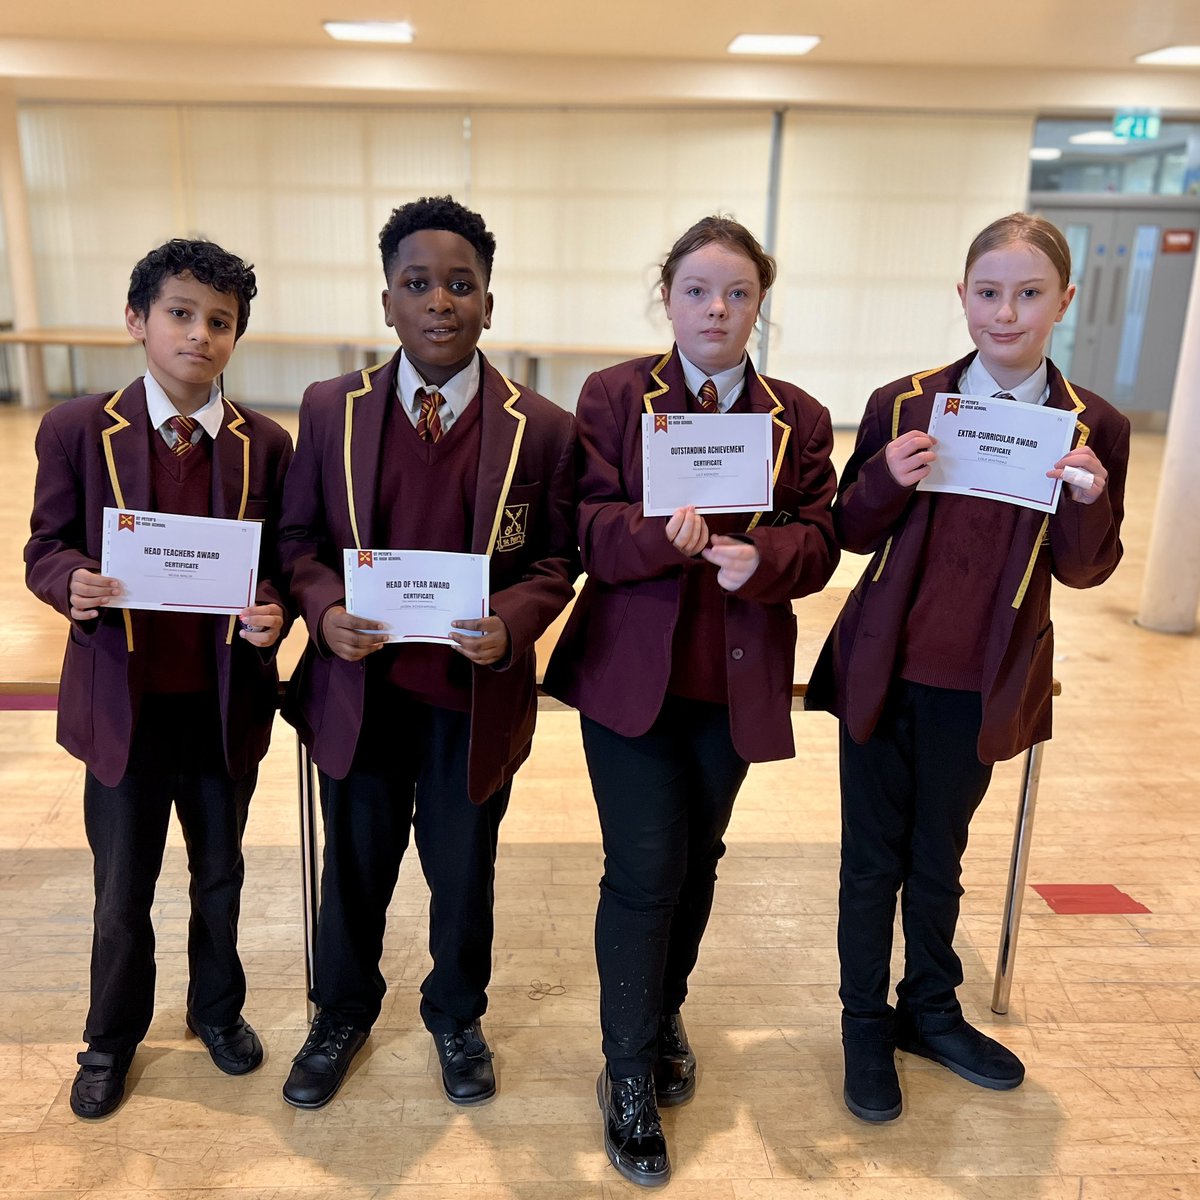 Starting off the new term by celebrating the achievements of our Year 7 Award Winners from last term! Congratulations to all the winners, let's strive for excellence once again this term! #year7 #awards